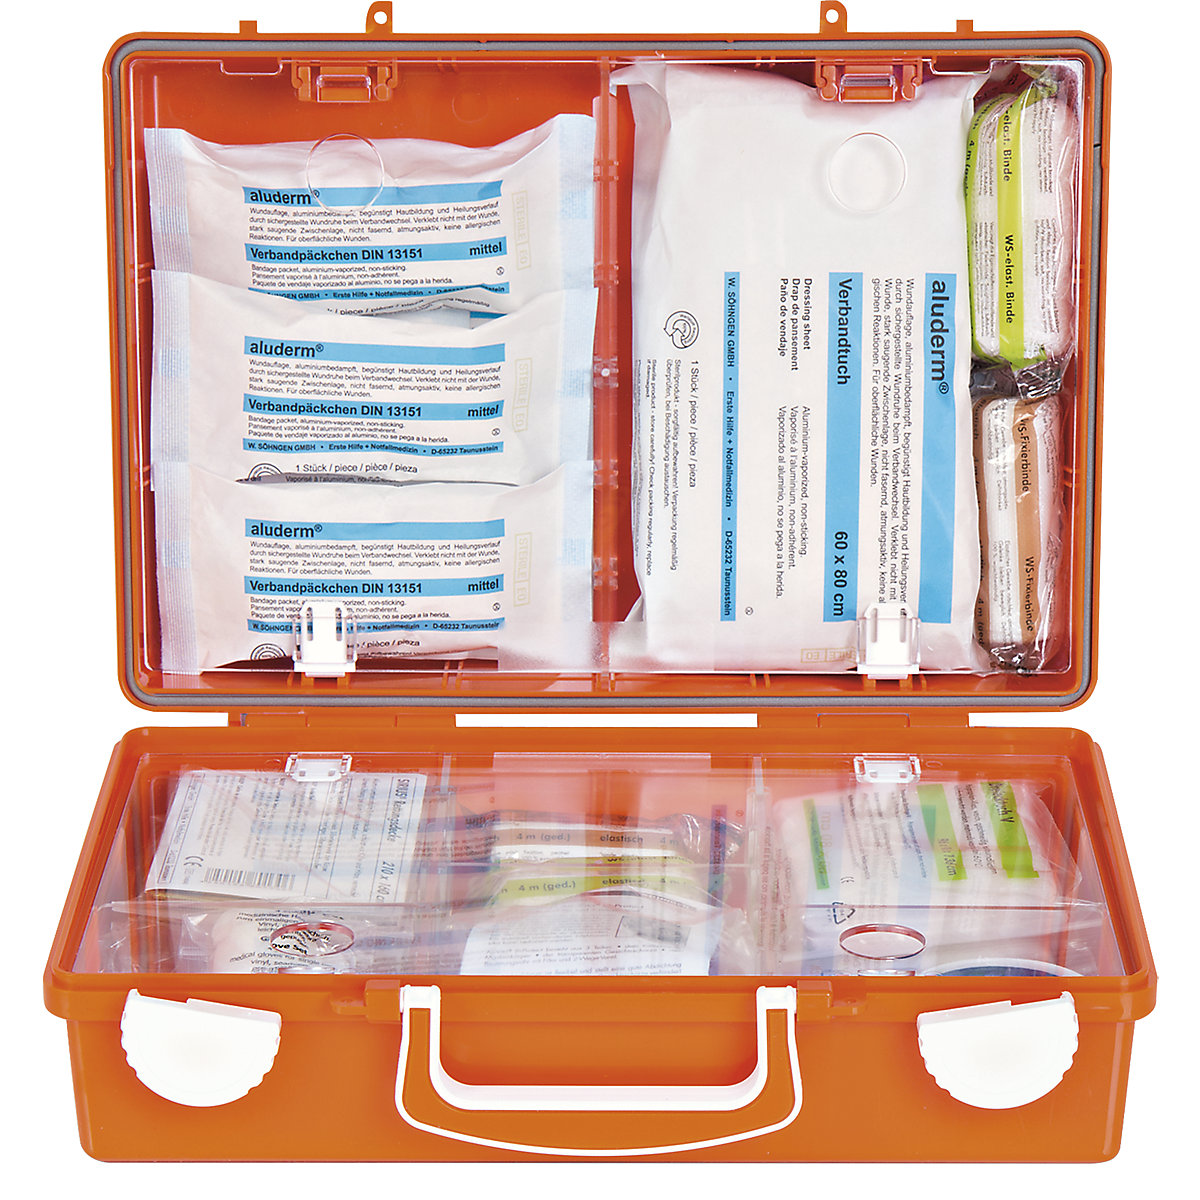 SÖHNGEN – First aid case, DIN 13157 compliant, HxWxD 210 x 310 x 130 mm, with contents